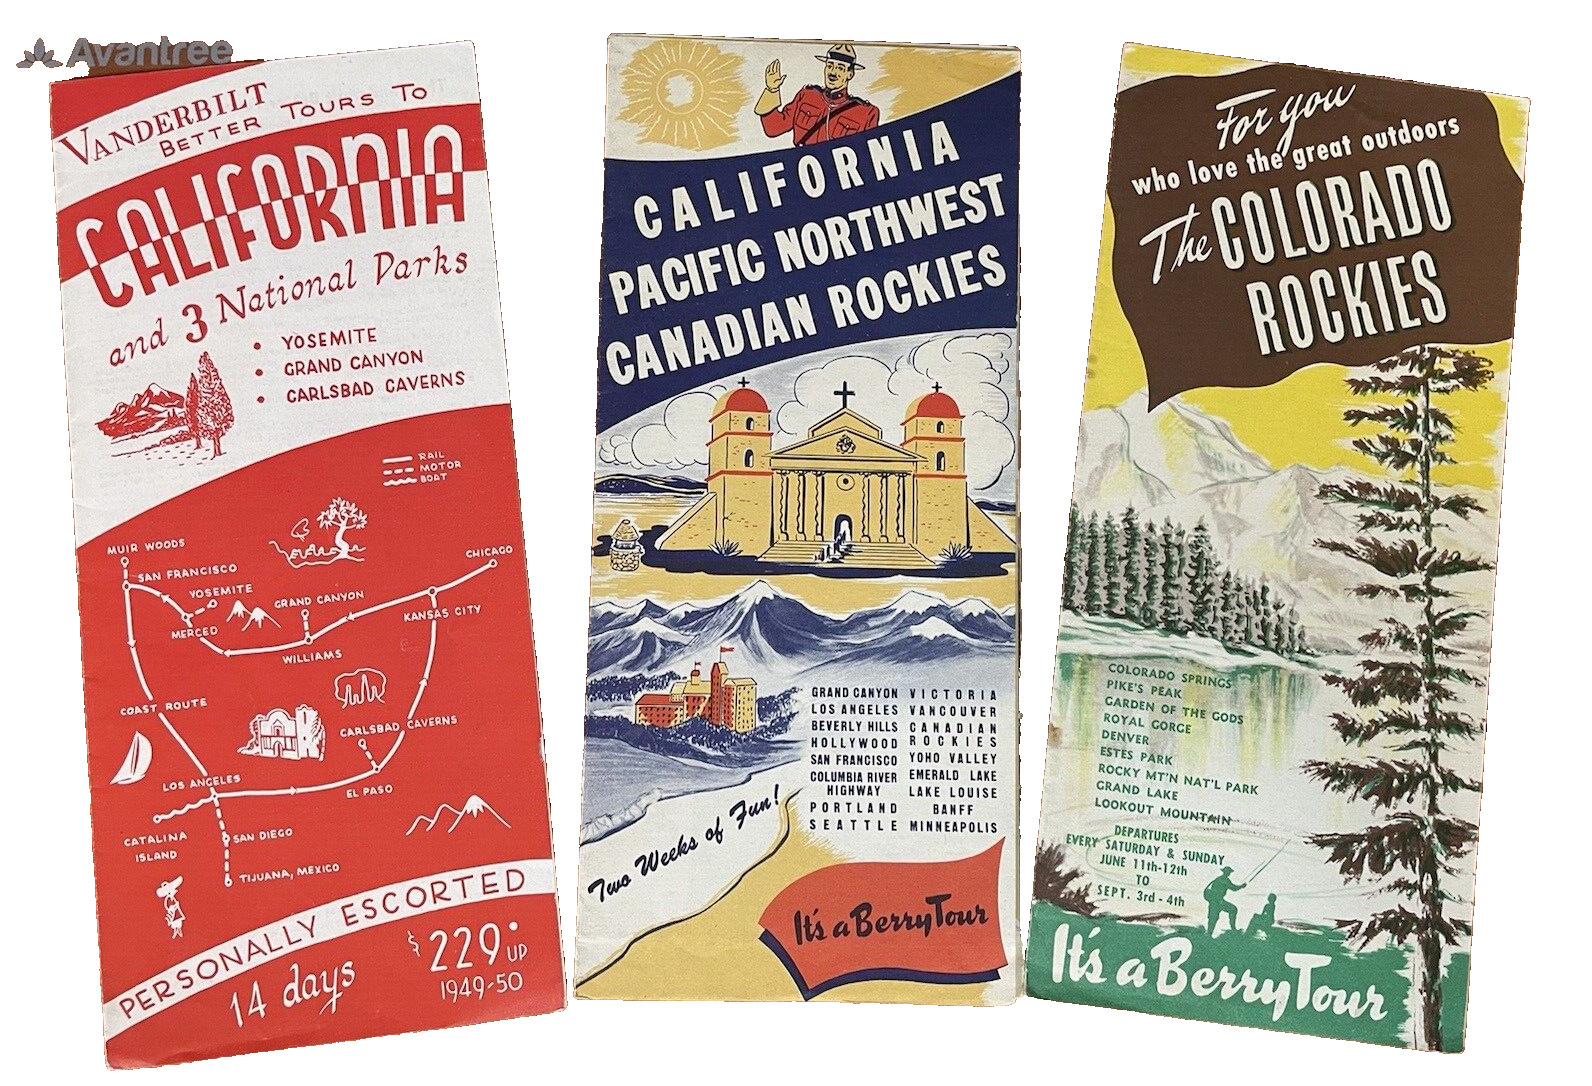 1949 Travel Brochures Colorado Rockies CA Pacific NW Berry Tours Parks Lot of 3